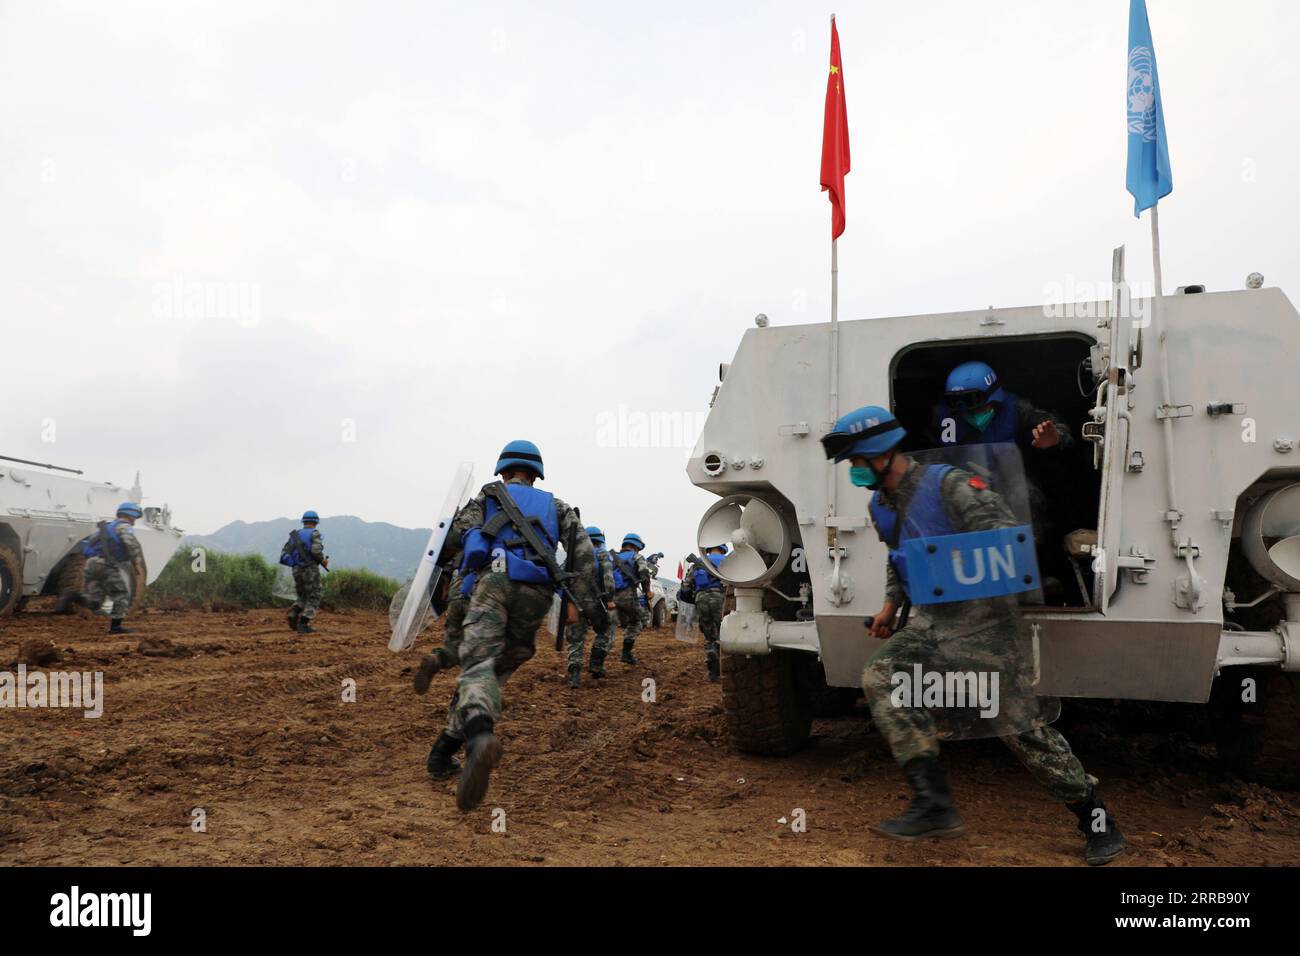 210908 -- ZHENGZHOU, Sept. 8, 2021 -- Peacekeepers participate in an international peacekeeping drill at a combined-arms tactical training base of the Chinese People s Liberation Army PLA in central China s Henan Province, Sept. 7, 2021. China started holding an international peacekeeping drill code-named Shared Destiny-2021 on Sept. 6. Drills of battlefield reconnaissance, security guarding and patrol, armed escort, protection of civilians, response to violent and terrorist attacks, construction of temporary operation base, battlefield first aid, and pandemic control are expected to be conduc Stock Photo